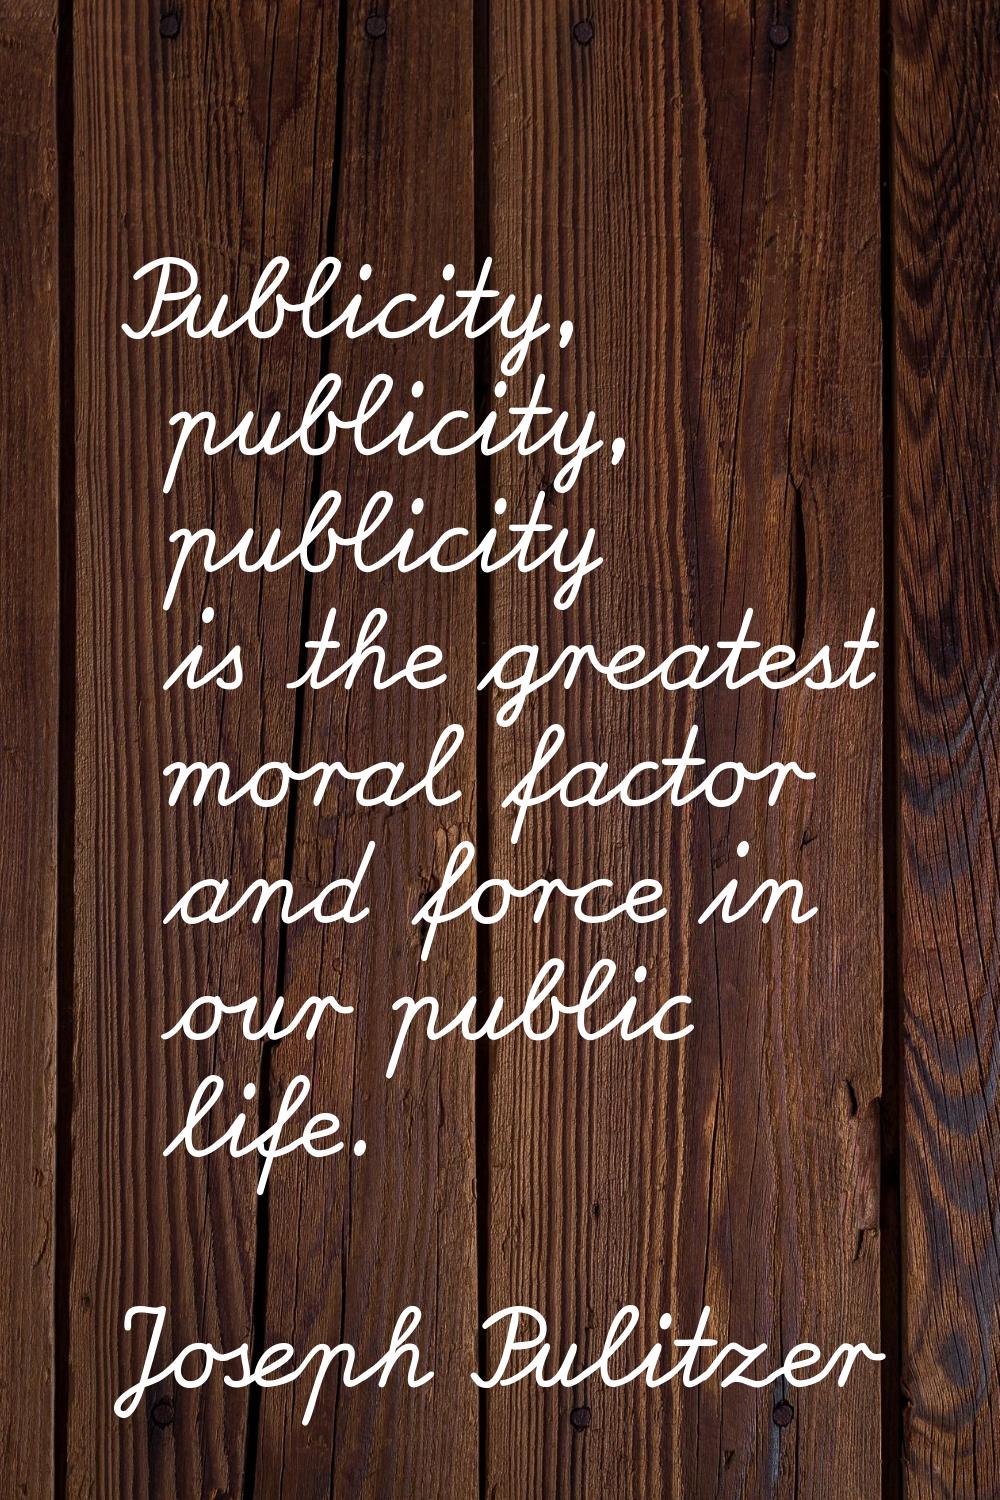 Publicity, publicity, publicity is the greatest moral factor and force in our public life.